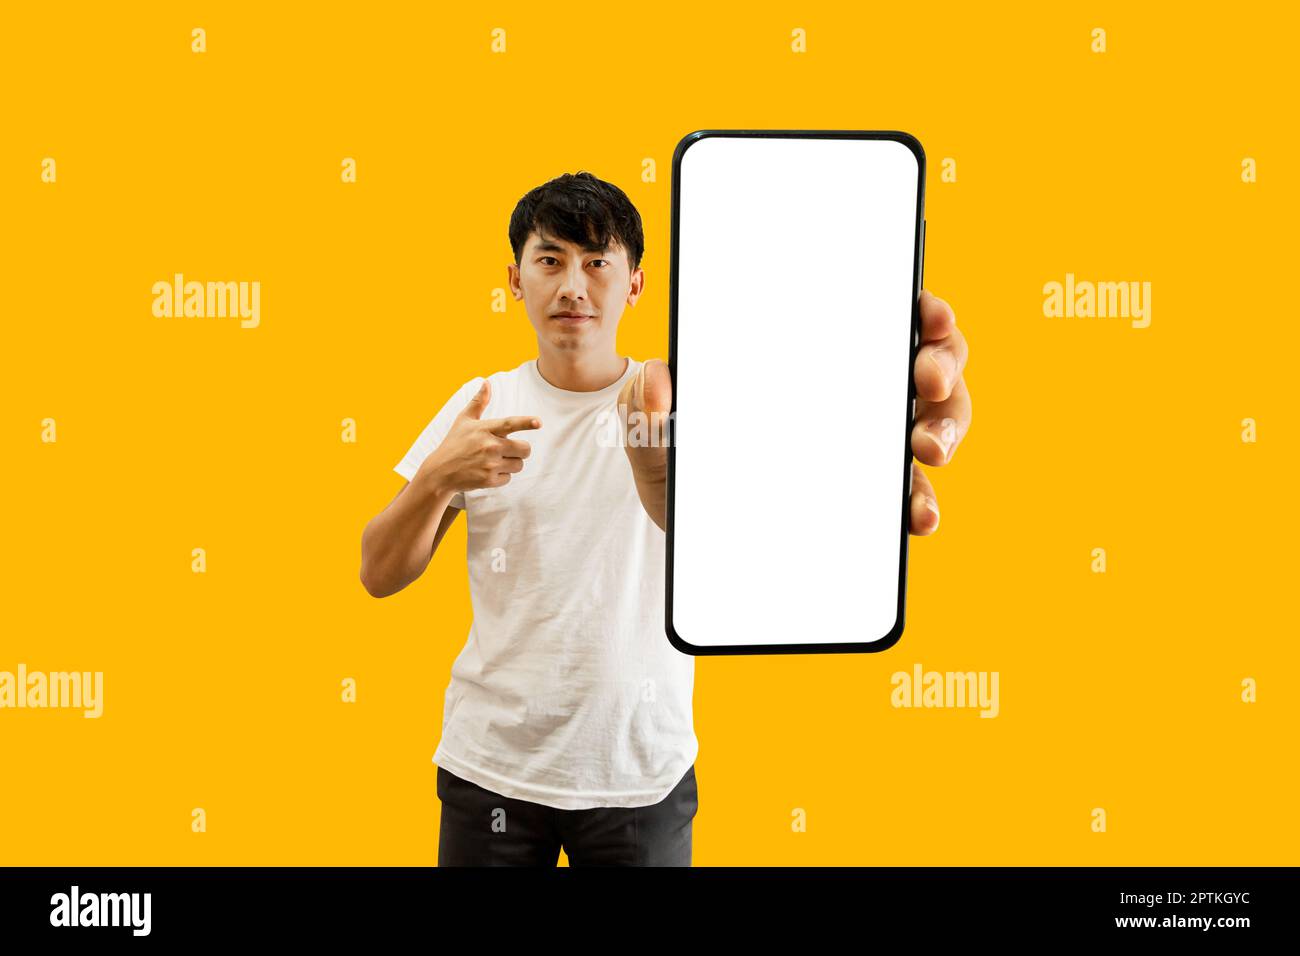 Asian Man Hand Pointing At Empty White Smartphone Screen on yellow Background. Cellphone Display Mock Up For Mobile App Advertisement. Stock Photo